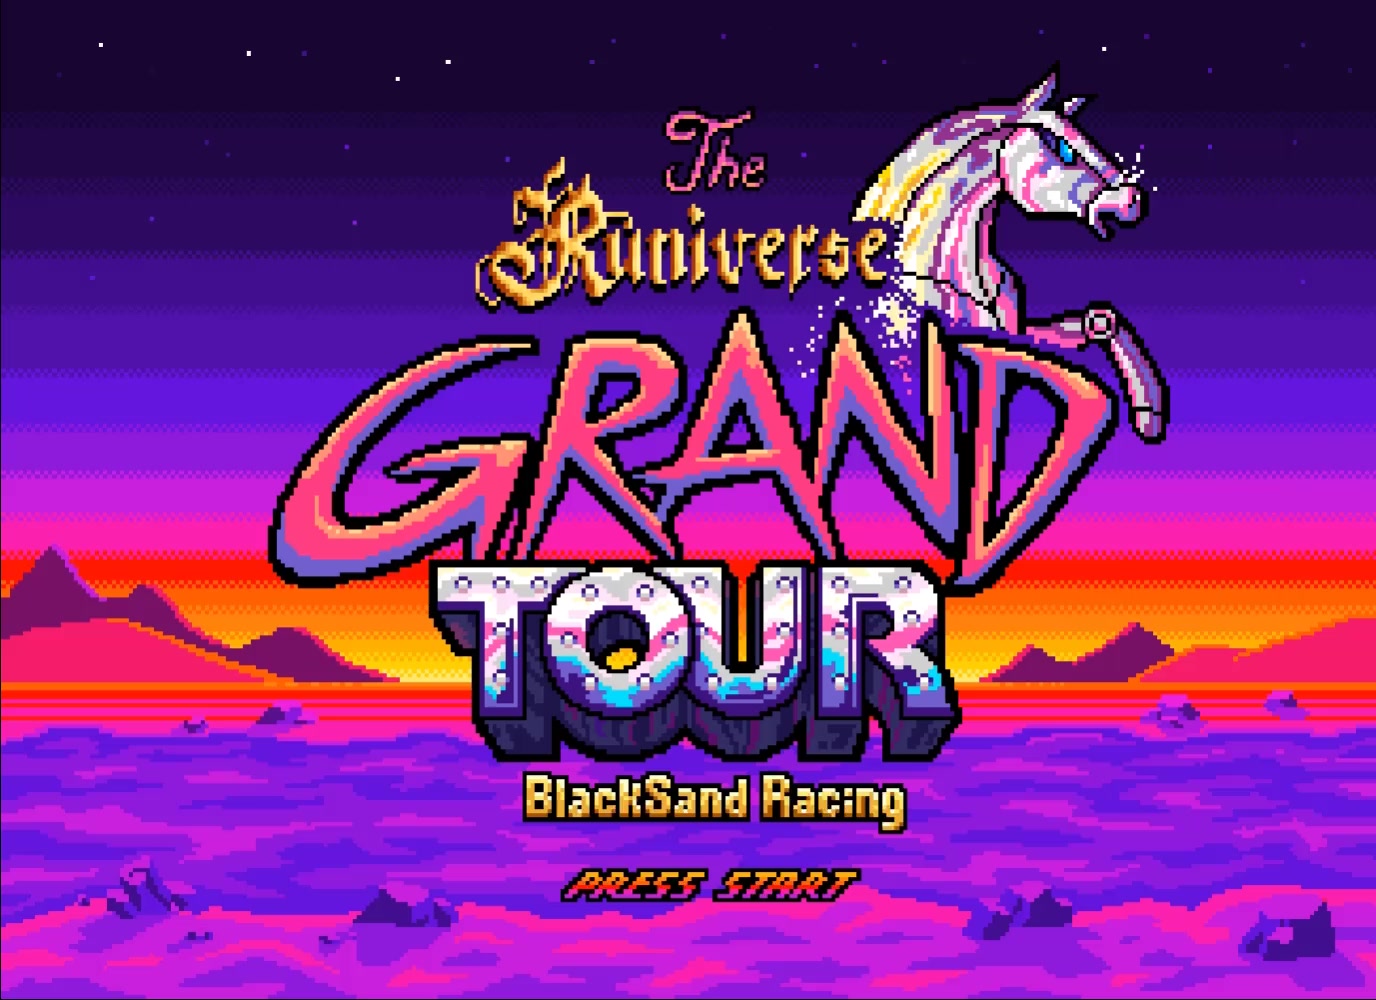 The Runiverse Grand Tour